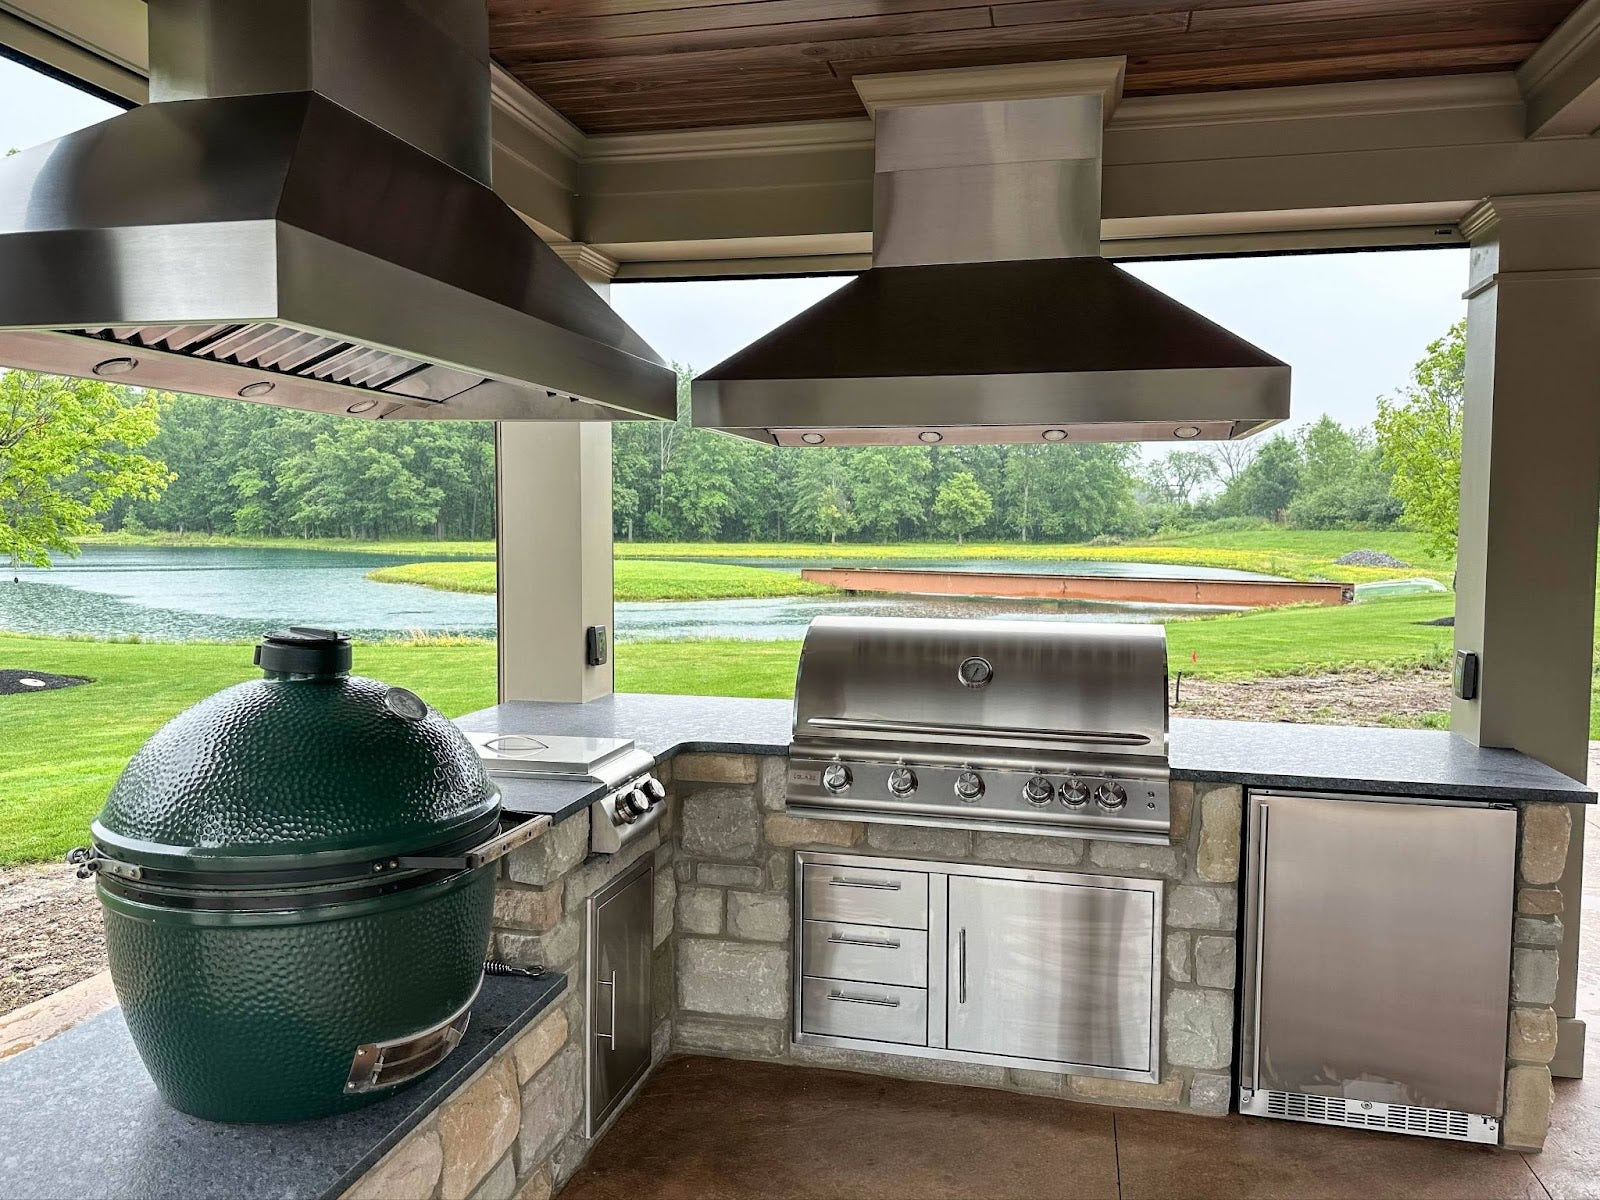 Sophisticated and functional outdoor grilling area equipped with a modern BBQ, green egg smoker, and a refrigeration unit, set against a picturesque pond backdrop. - Proline Range Hoods - prolinerangehoods.com 